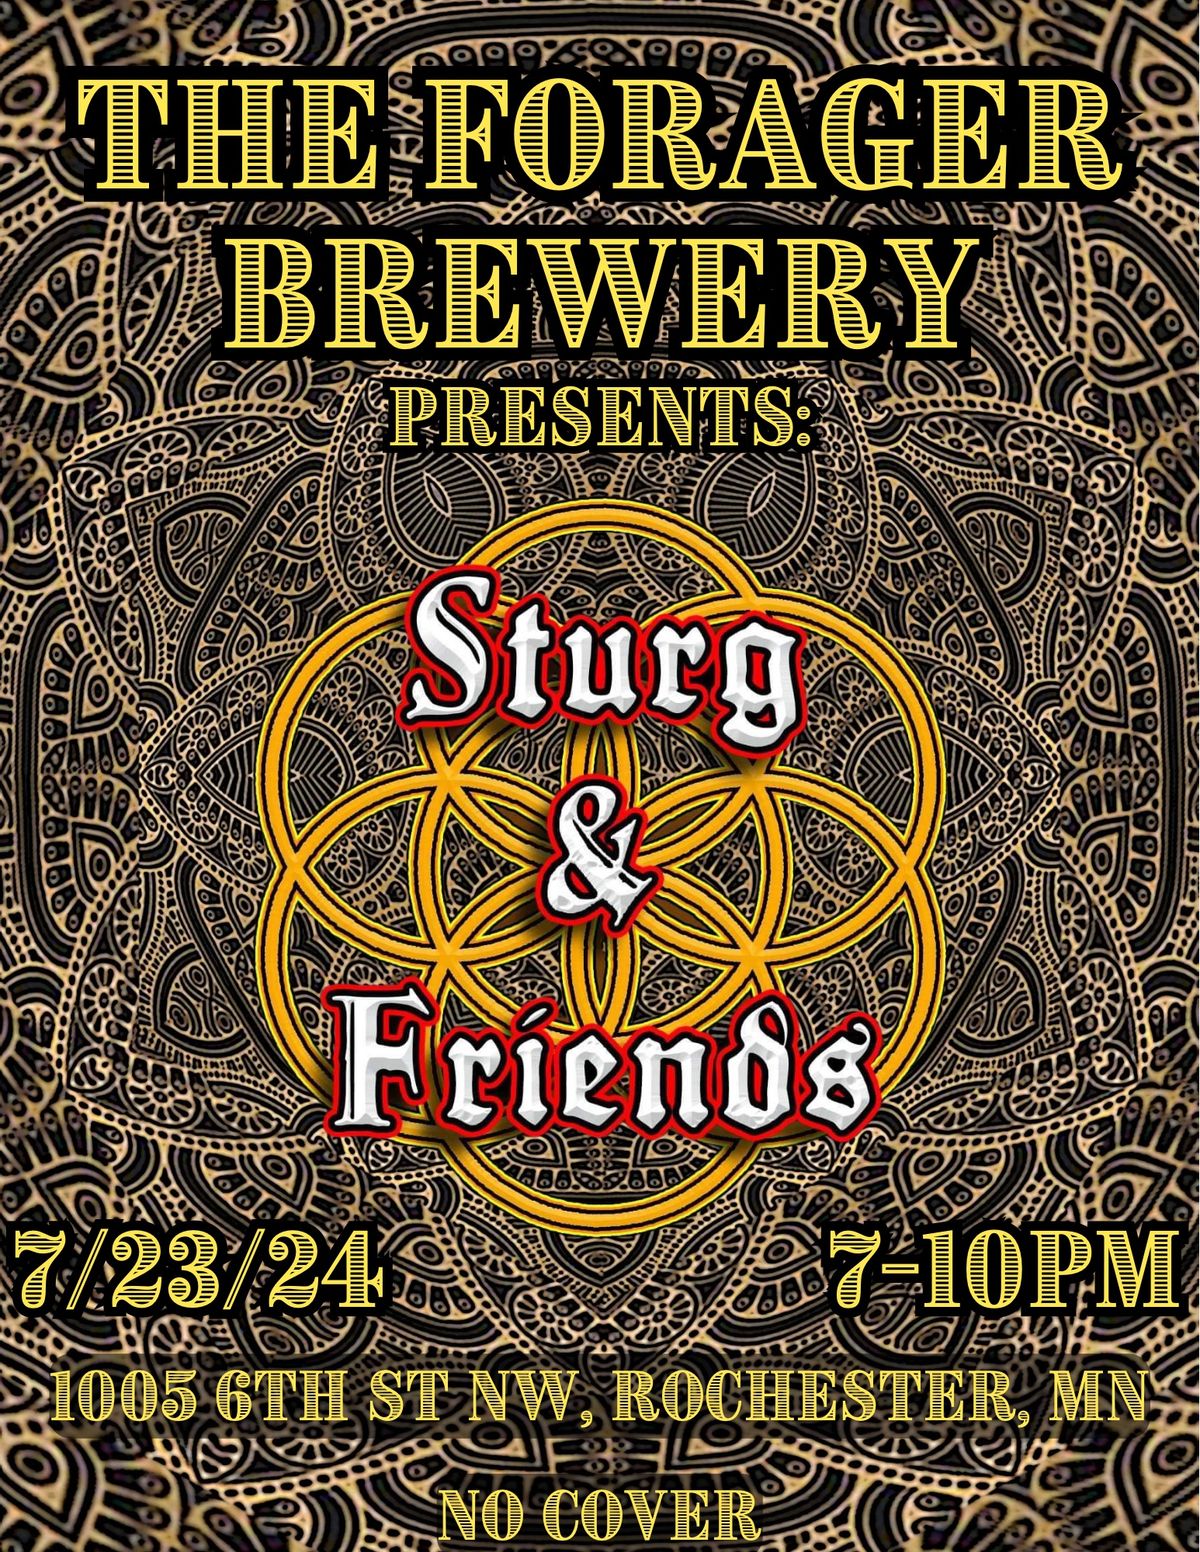 STURG & FRIENDS DEBUT @ FORAGER BREWERY